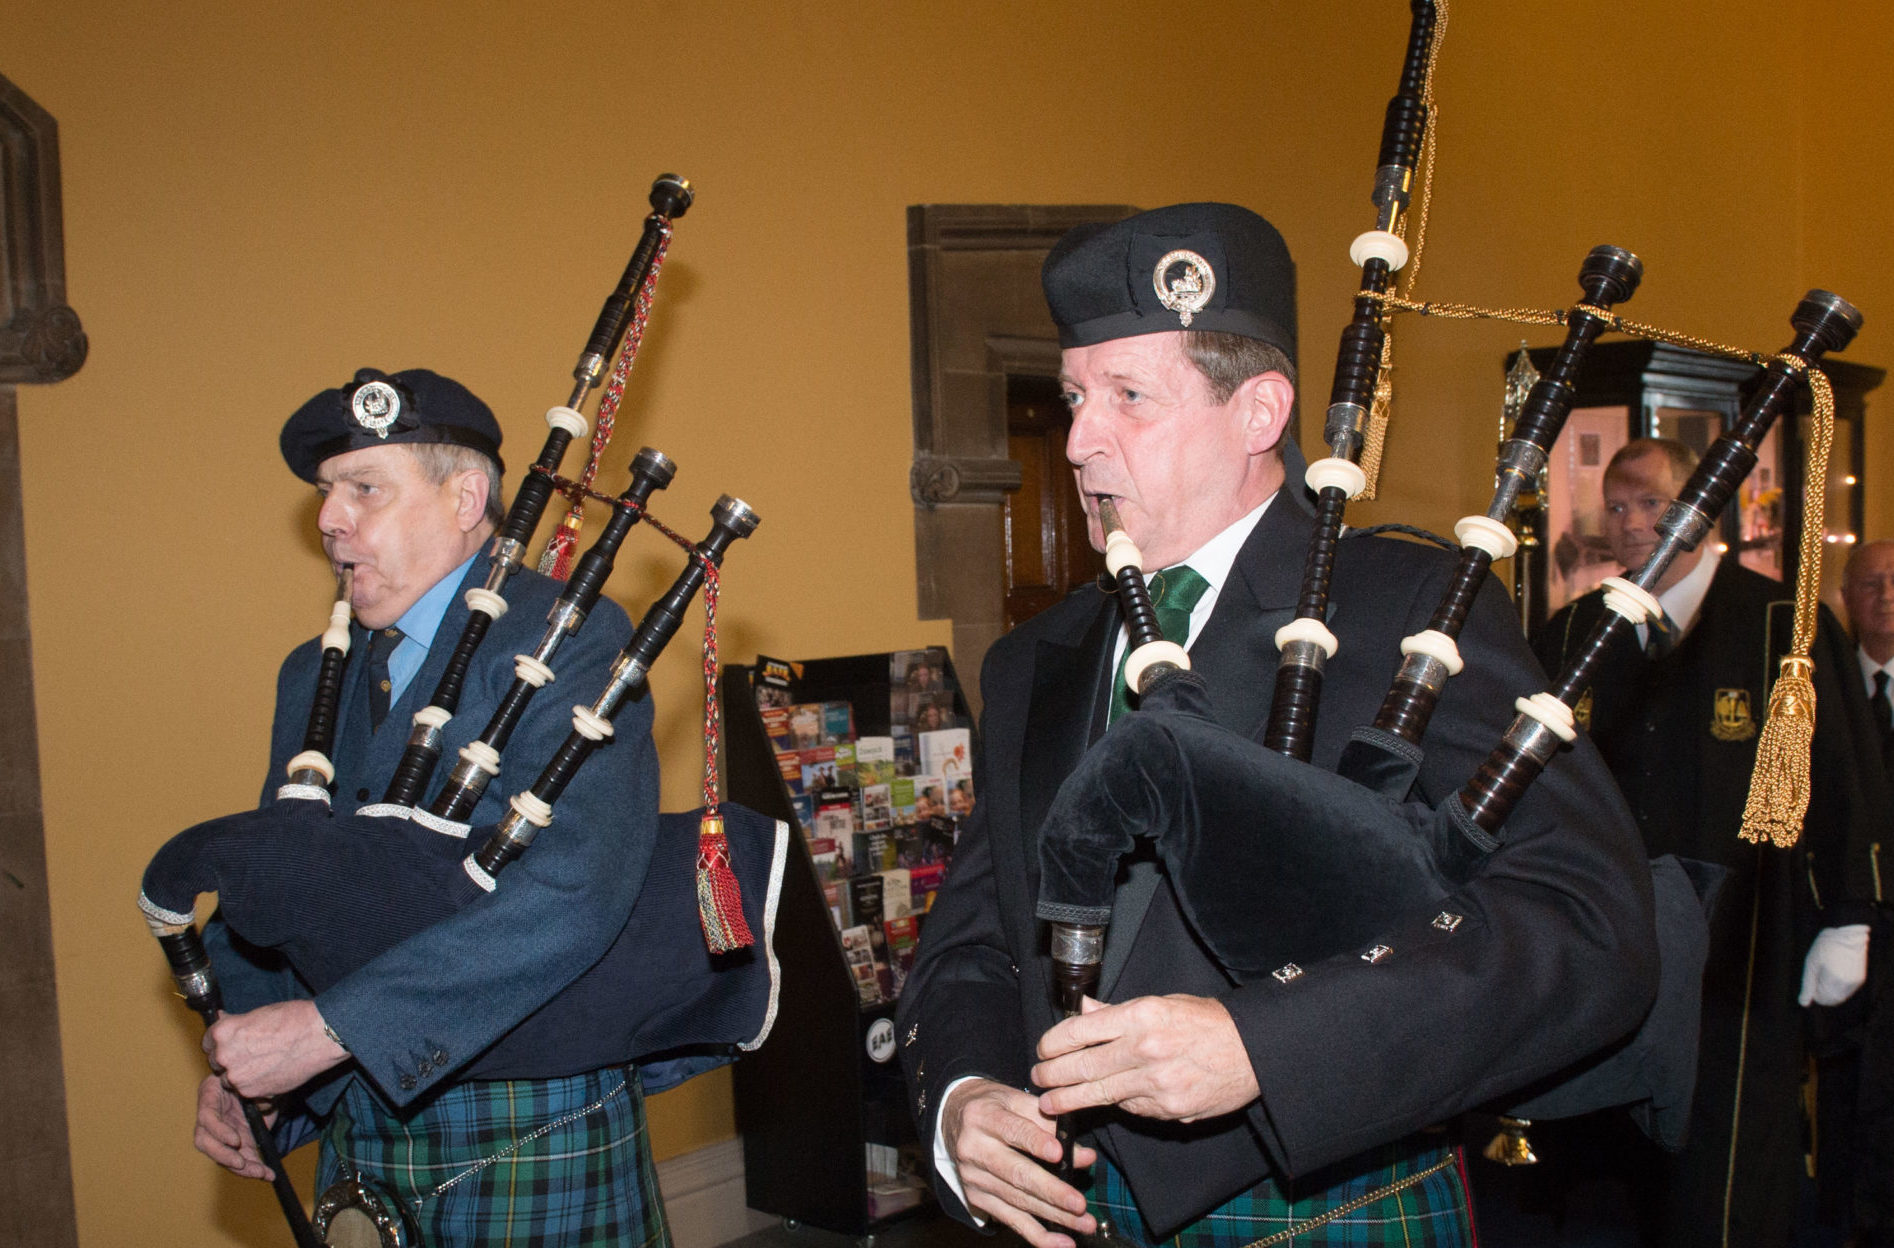 Alastair (right) piping at Glasgow University